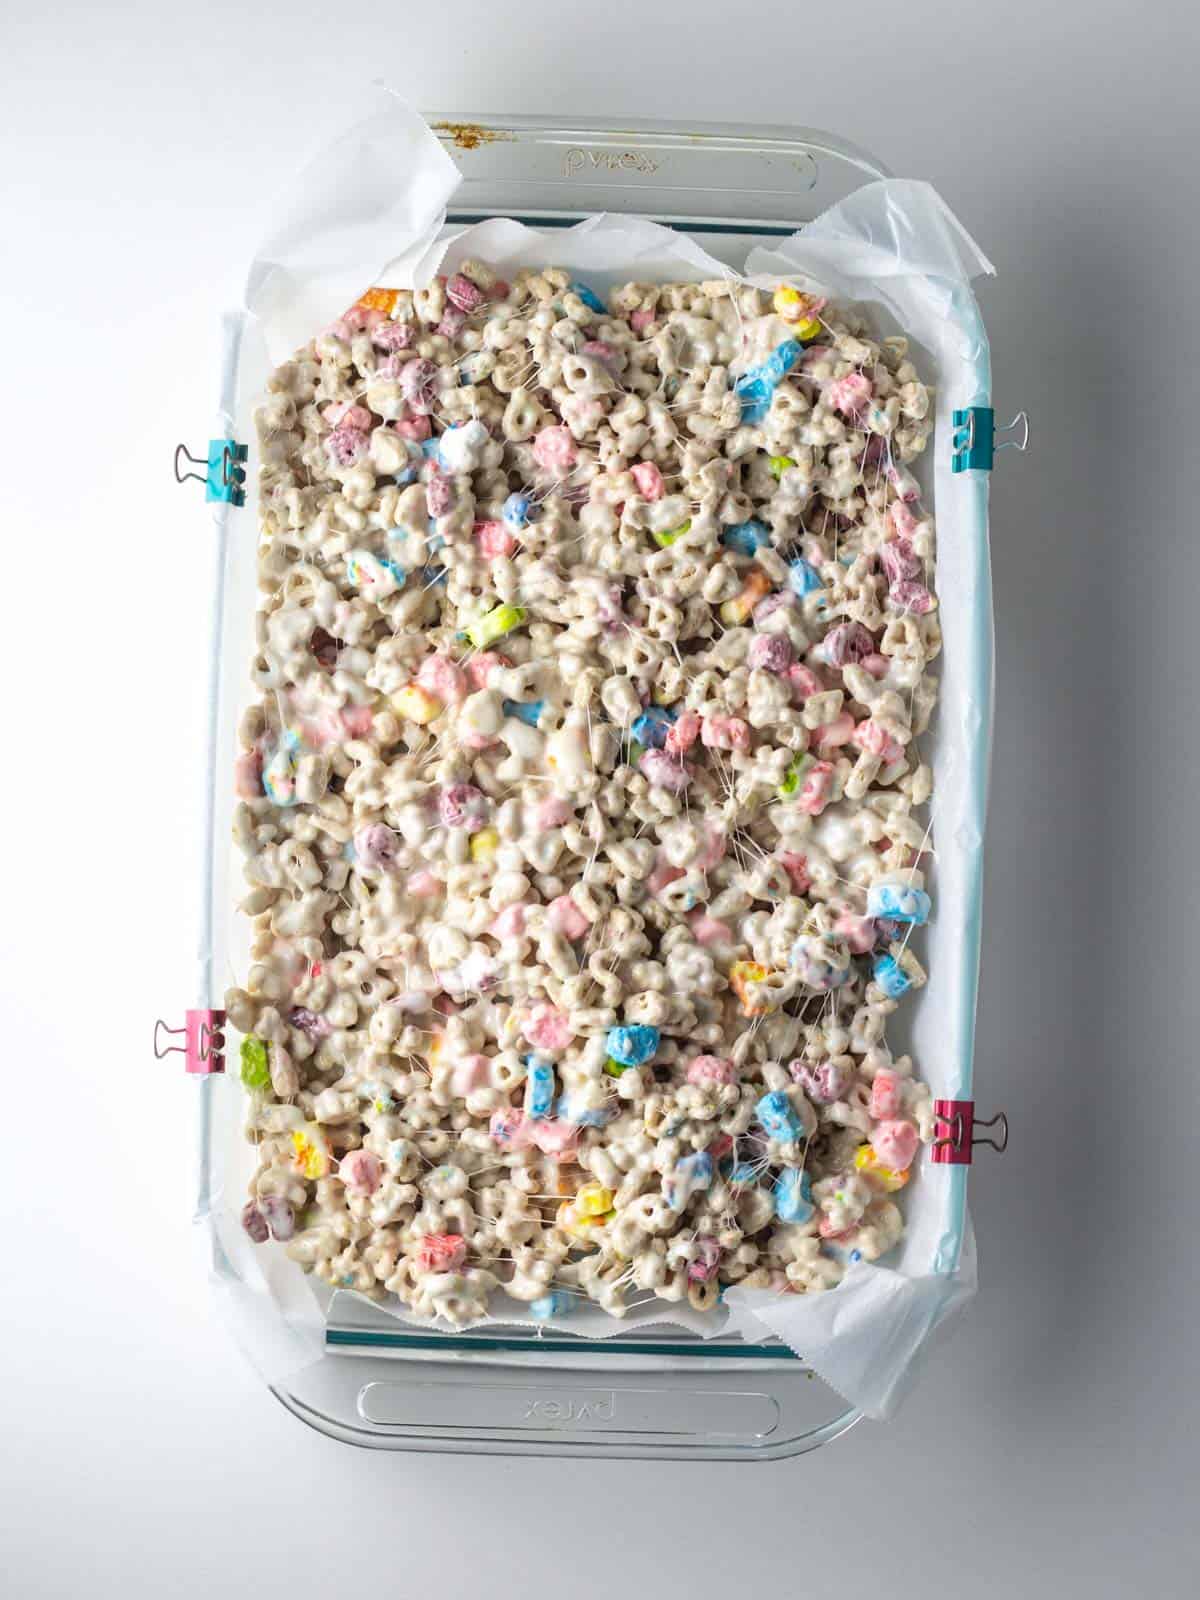 The cereal marshmallow mixture pressed into the 9x13 parchment lined glass pan.